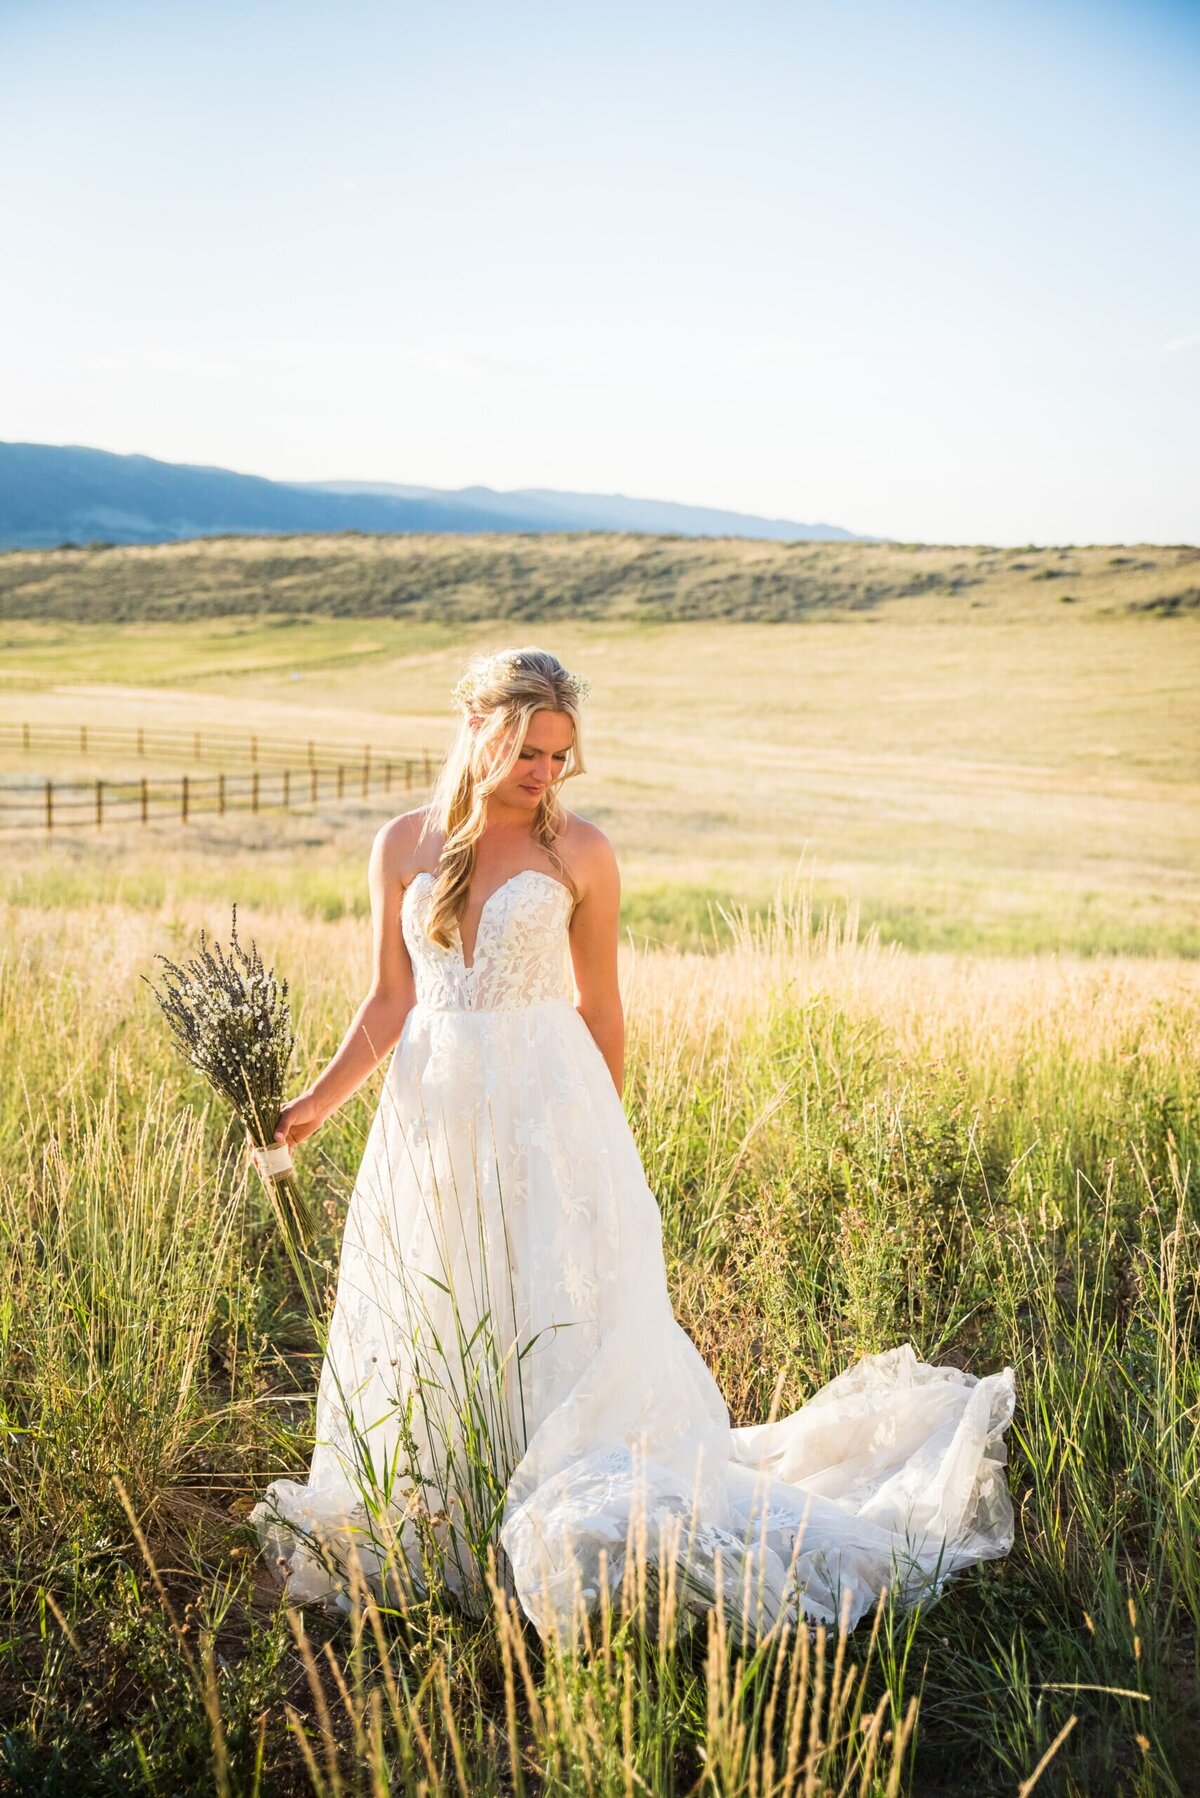 A bride holding her bouquet stands in a golden field and glances down at her wedding dress.